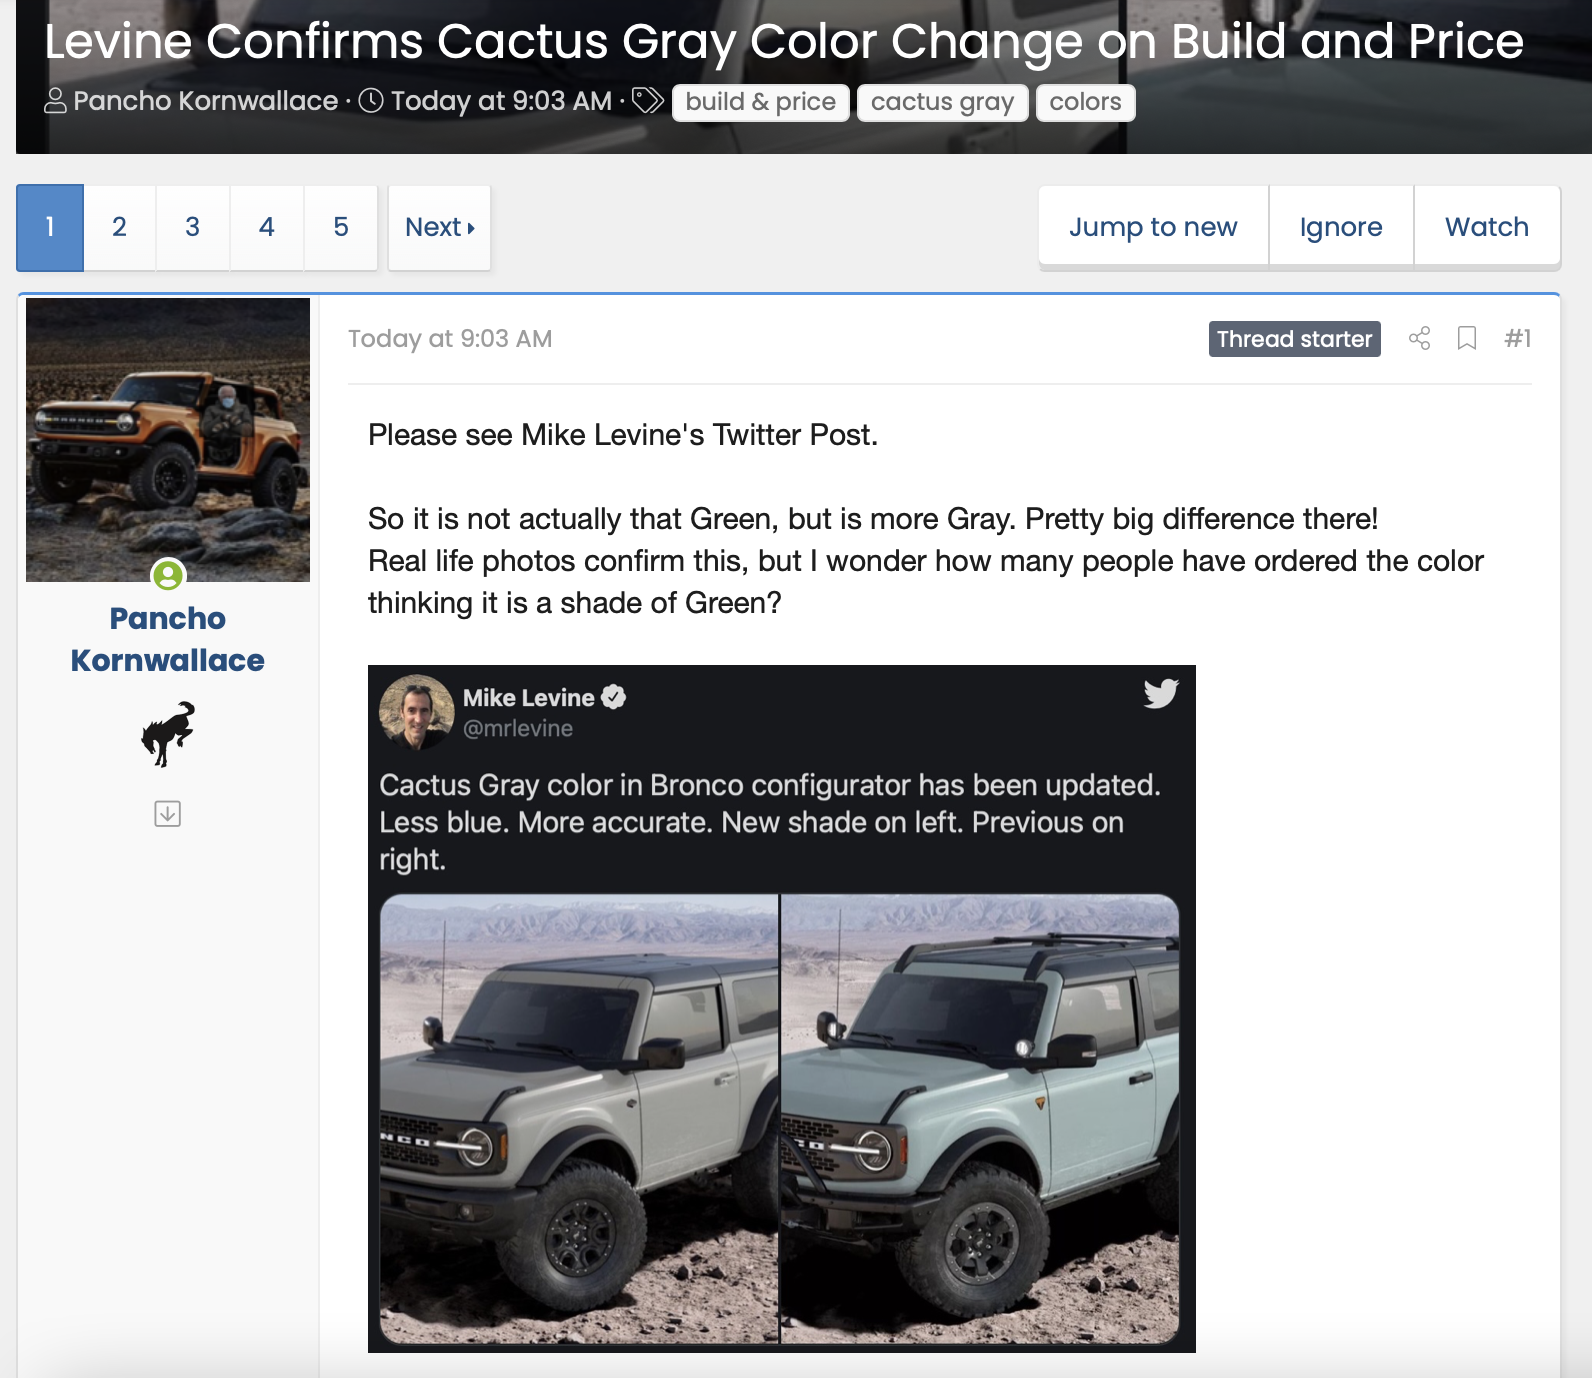 Ford Bronco Levine Confirms Cactus Gray Color Change on Build and Price Screen Shot 2021-02-08 at 11.28.45 AM